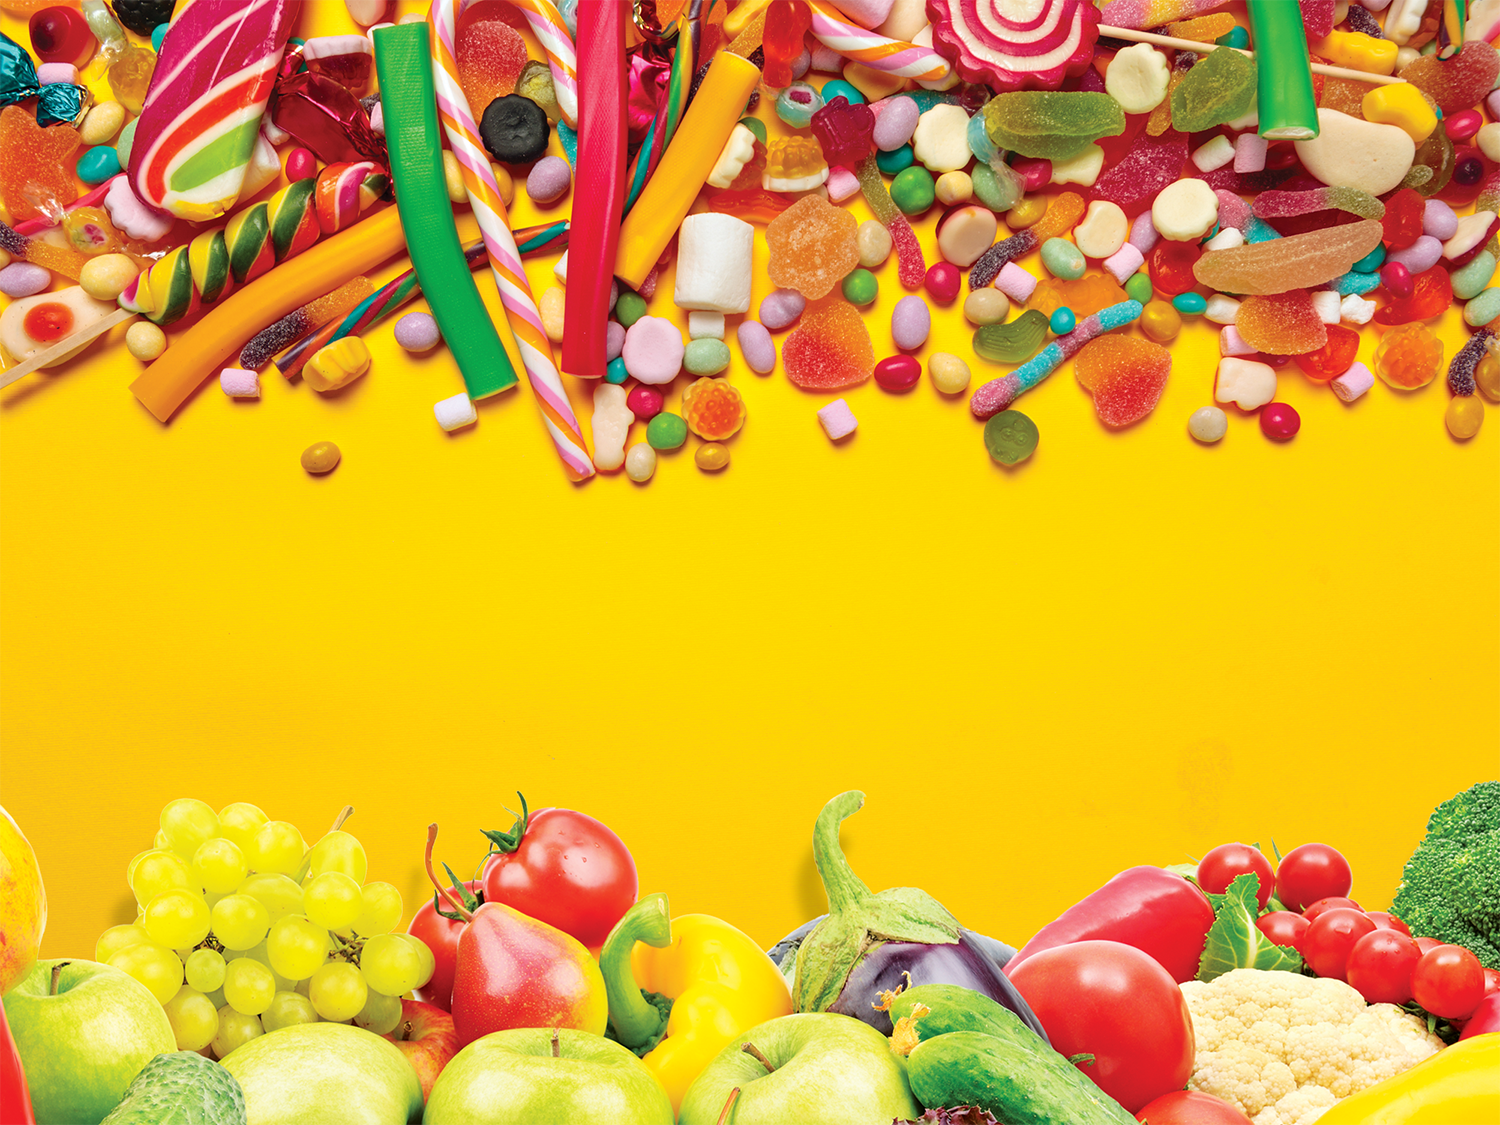 A yellow background with candy at the top and fruits and vegetables at the bottom.